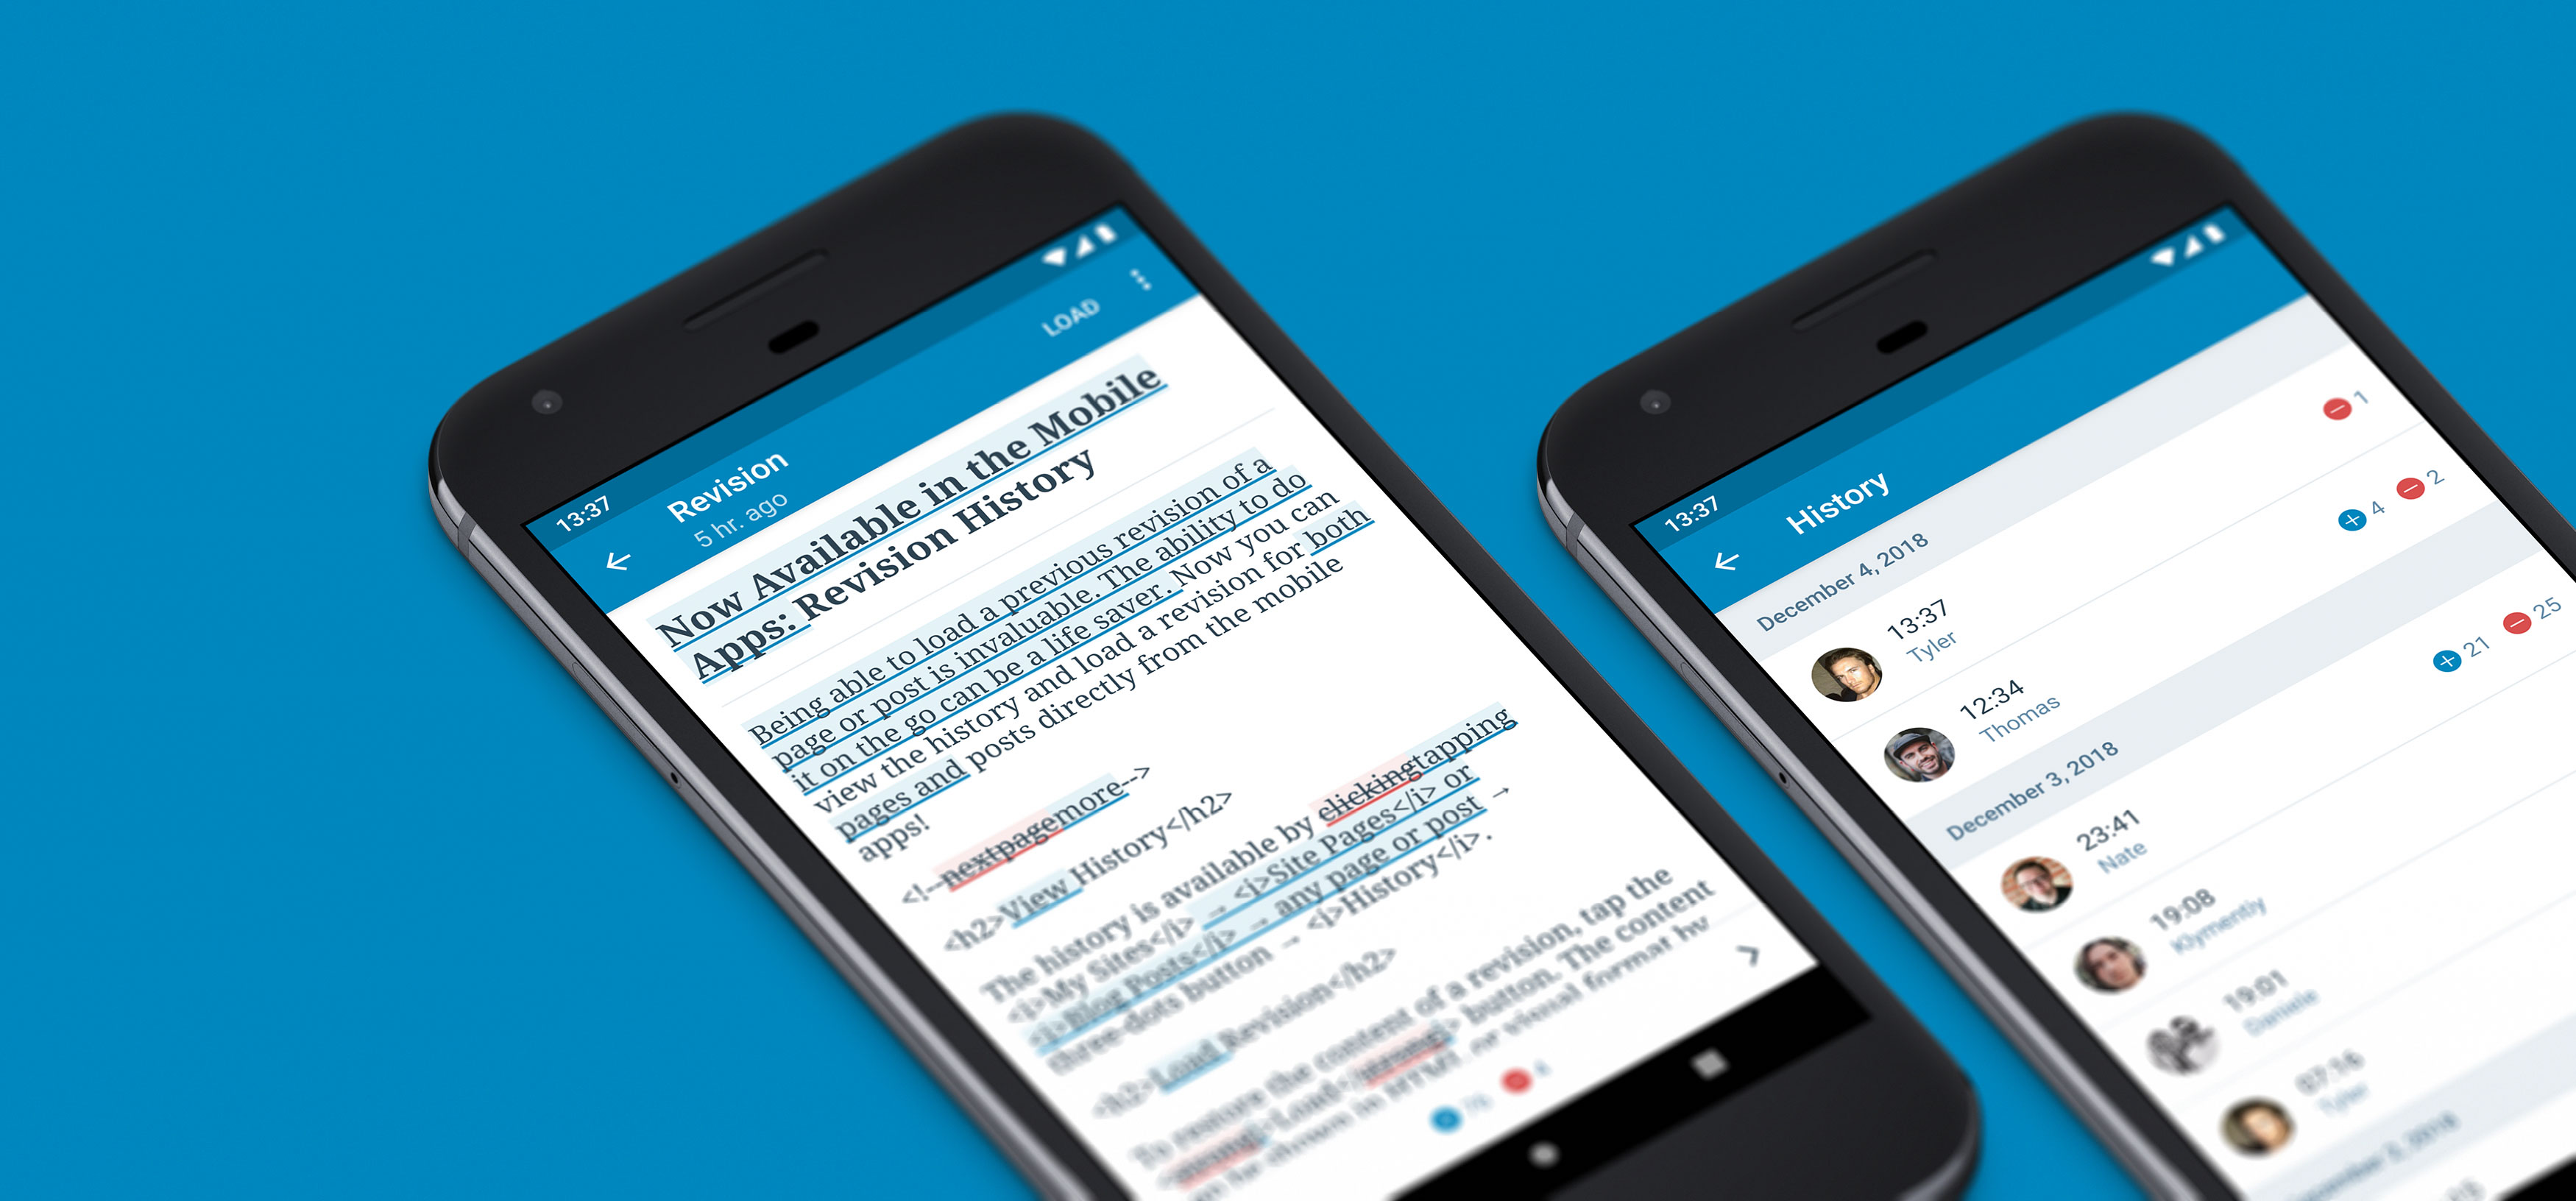 Now Available in the Mobile Apps: Revision History